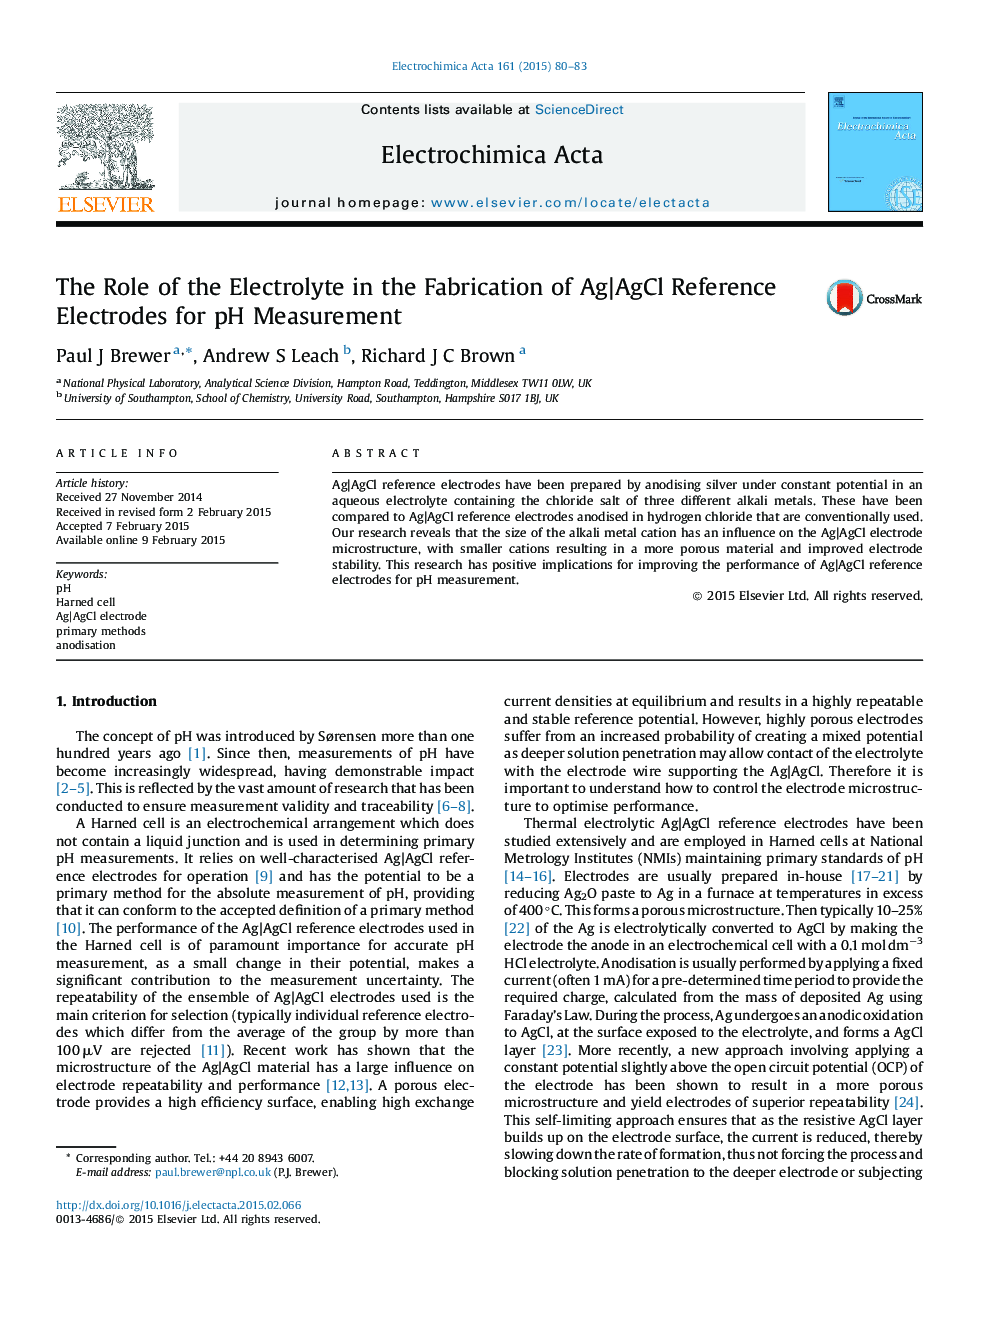 The Role of the Electrolyte in the Fabrication of Ag|AgCl Reference Electrodes for pH Measurement